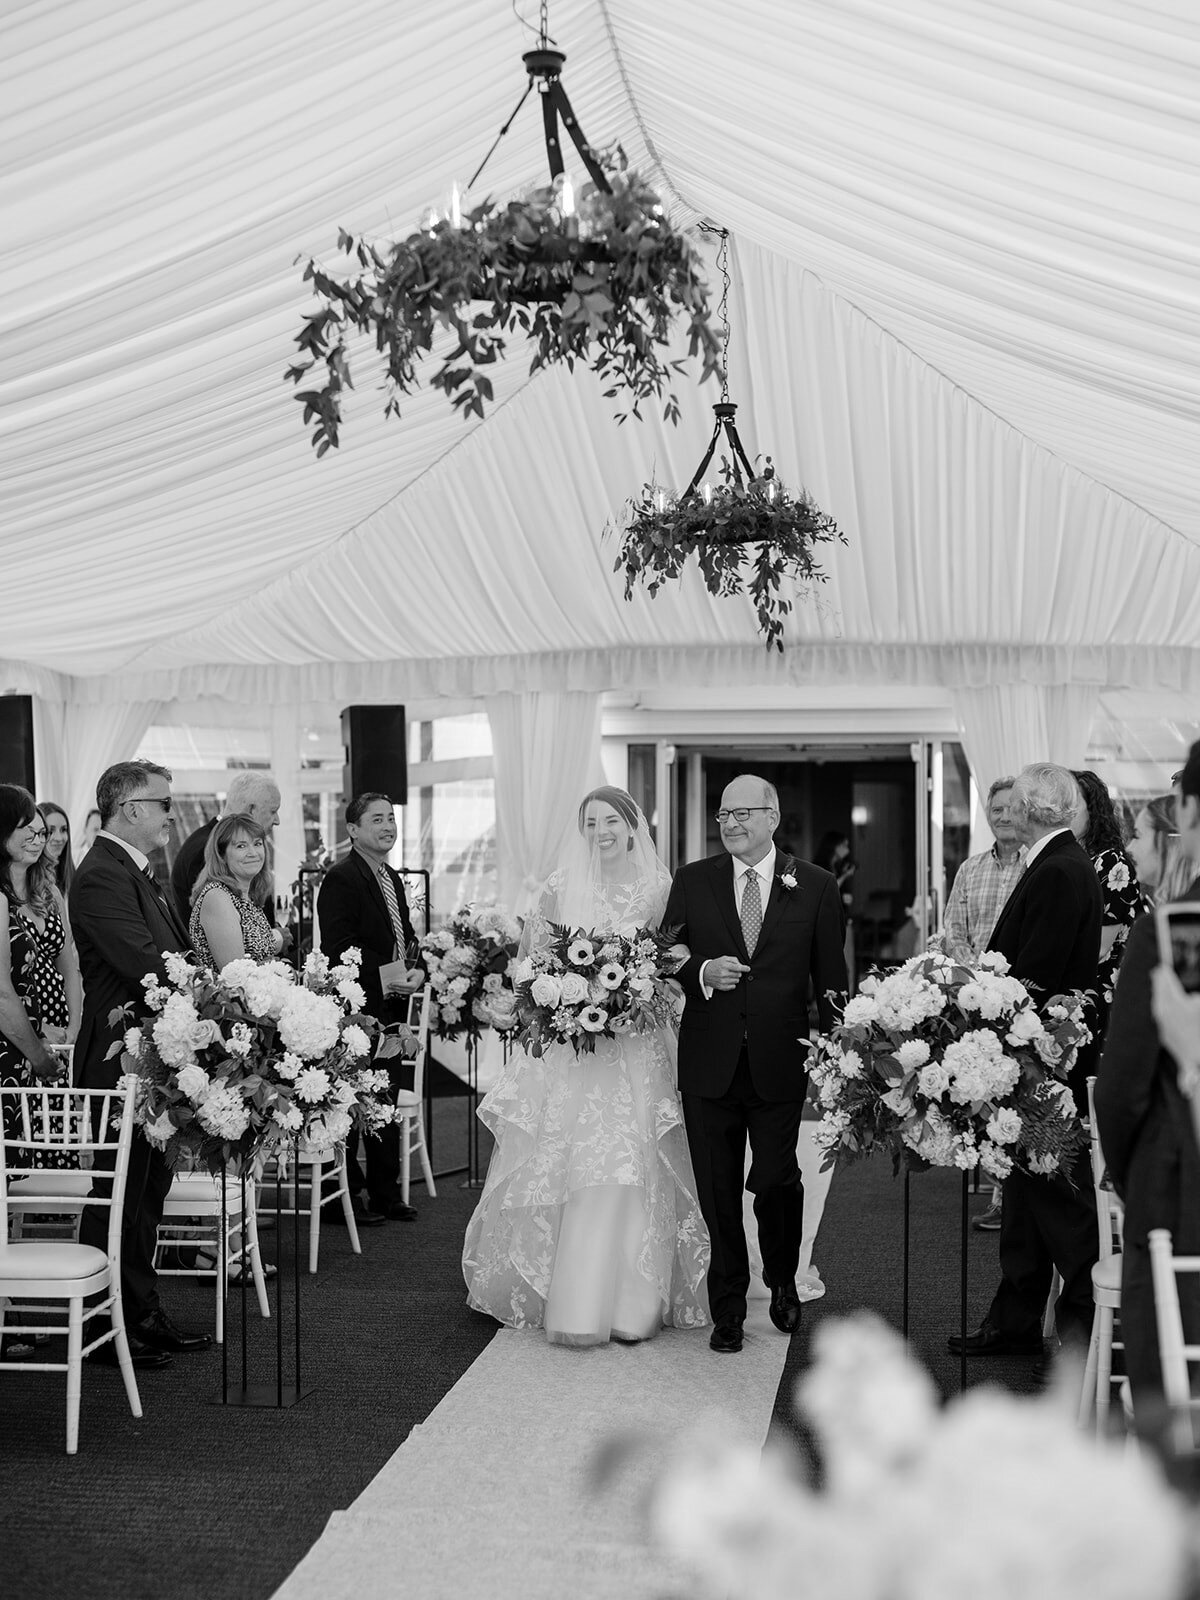 wedding-ceremony-Woodmark-hotel-kirkland-wedding-ceremony-pictures-of-bride-walking-down-the-aisle-pacific-engagements-wedding-planner-seattle-wedding-photographer-anna-peters-photography